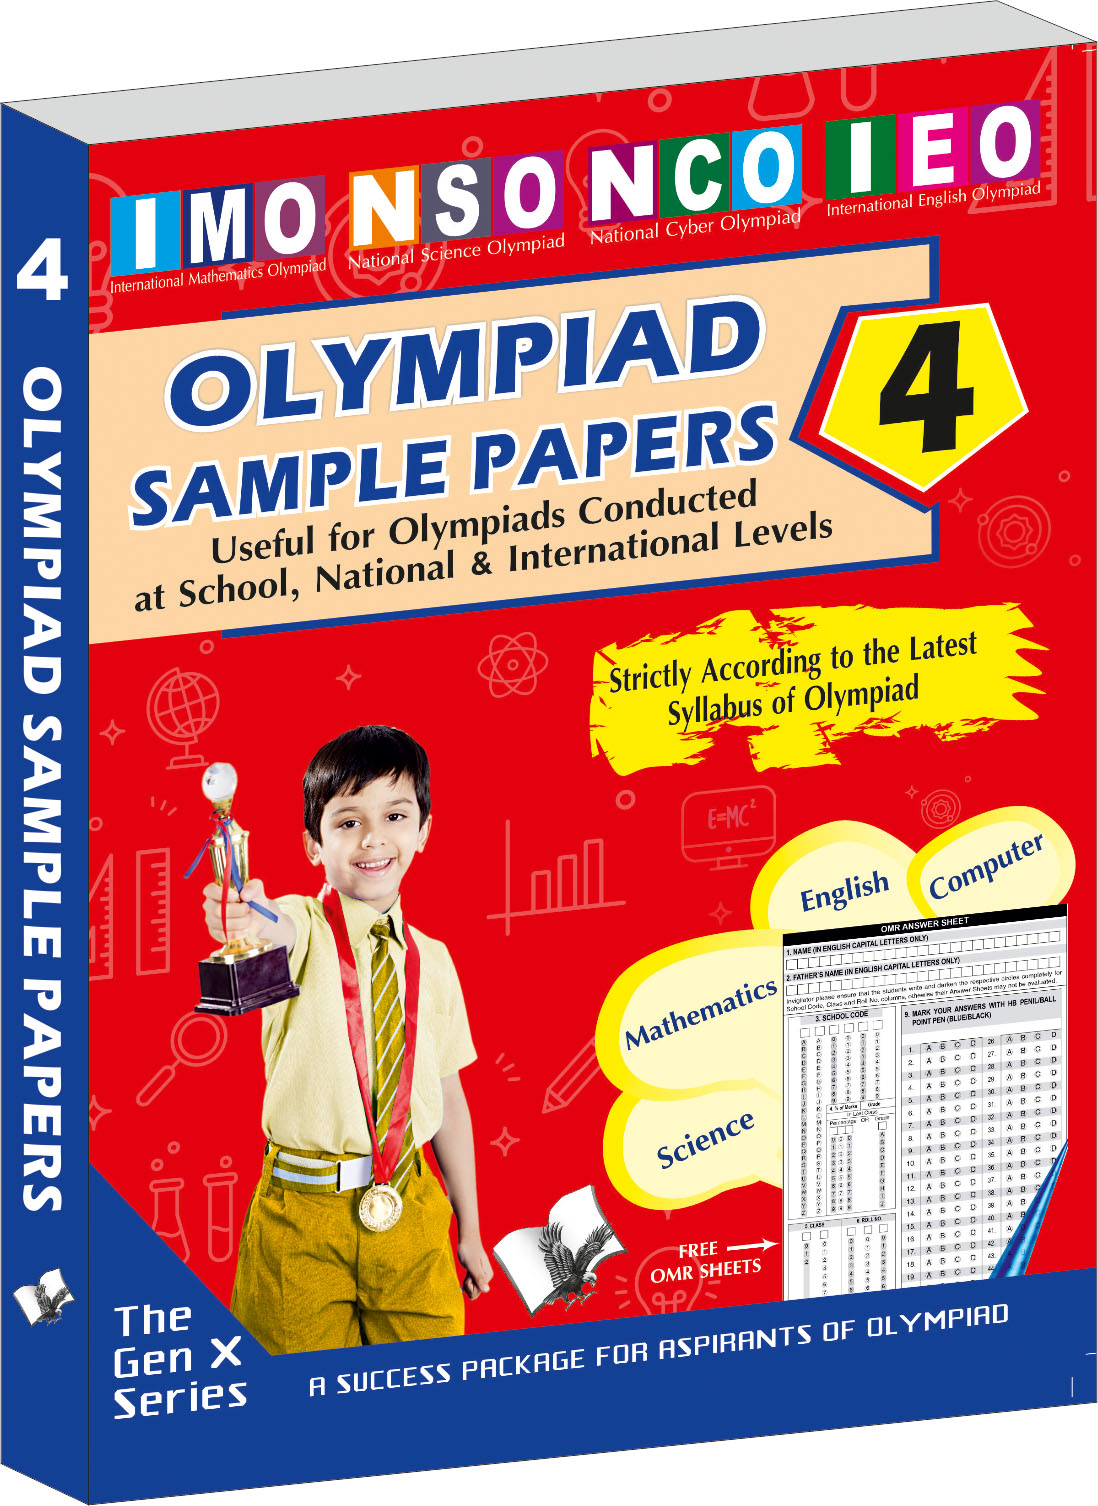 Olympiad Sample Paper 4-Useful for Olympiad conducted at School, National & International levels